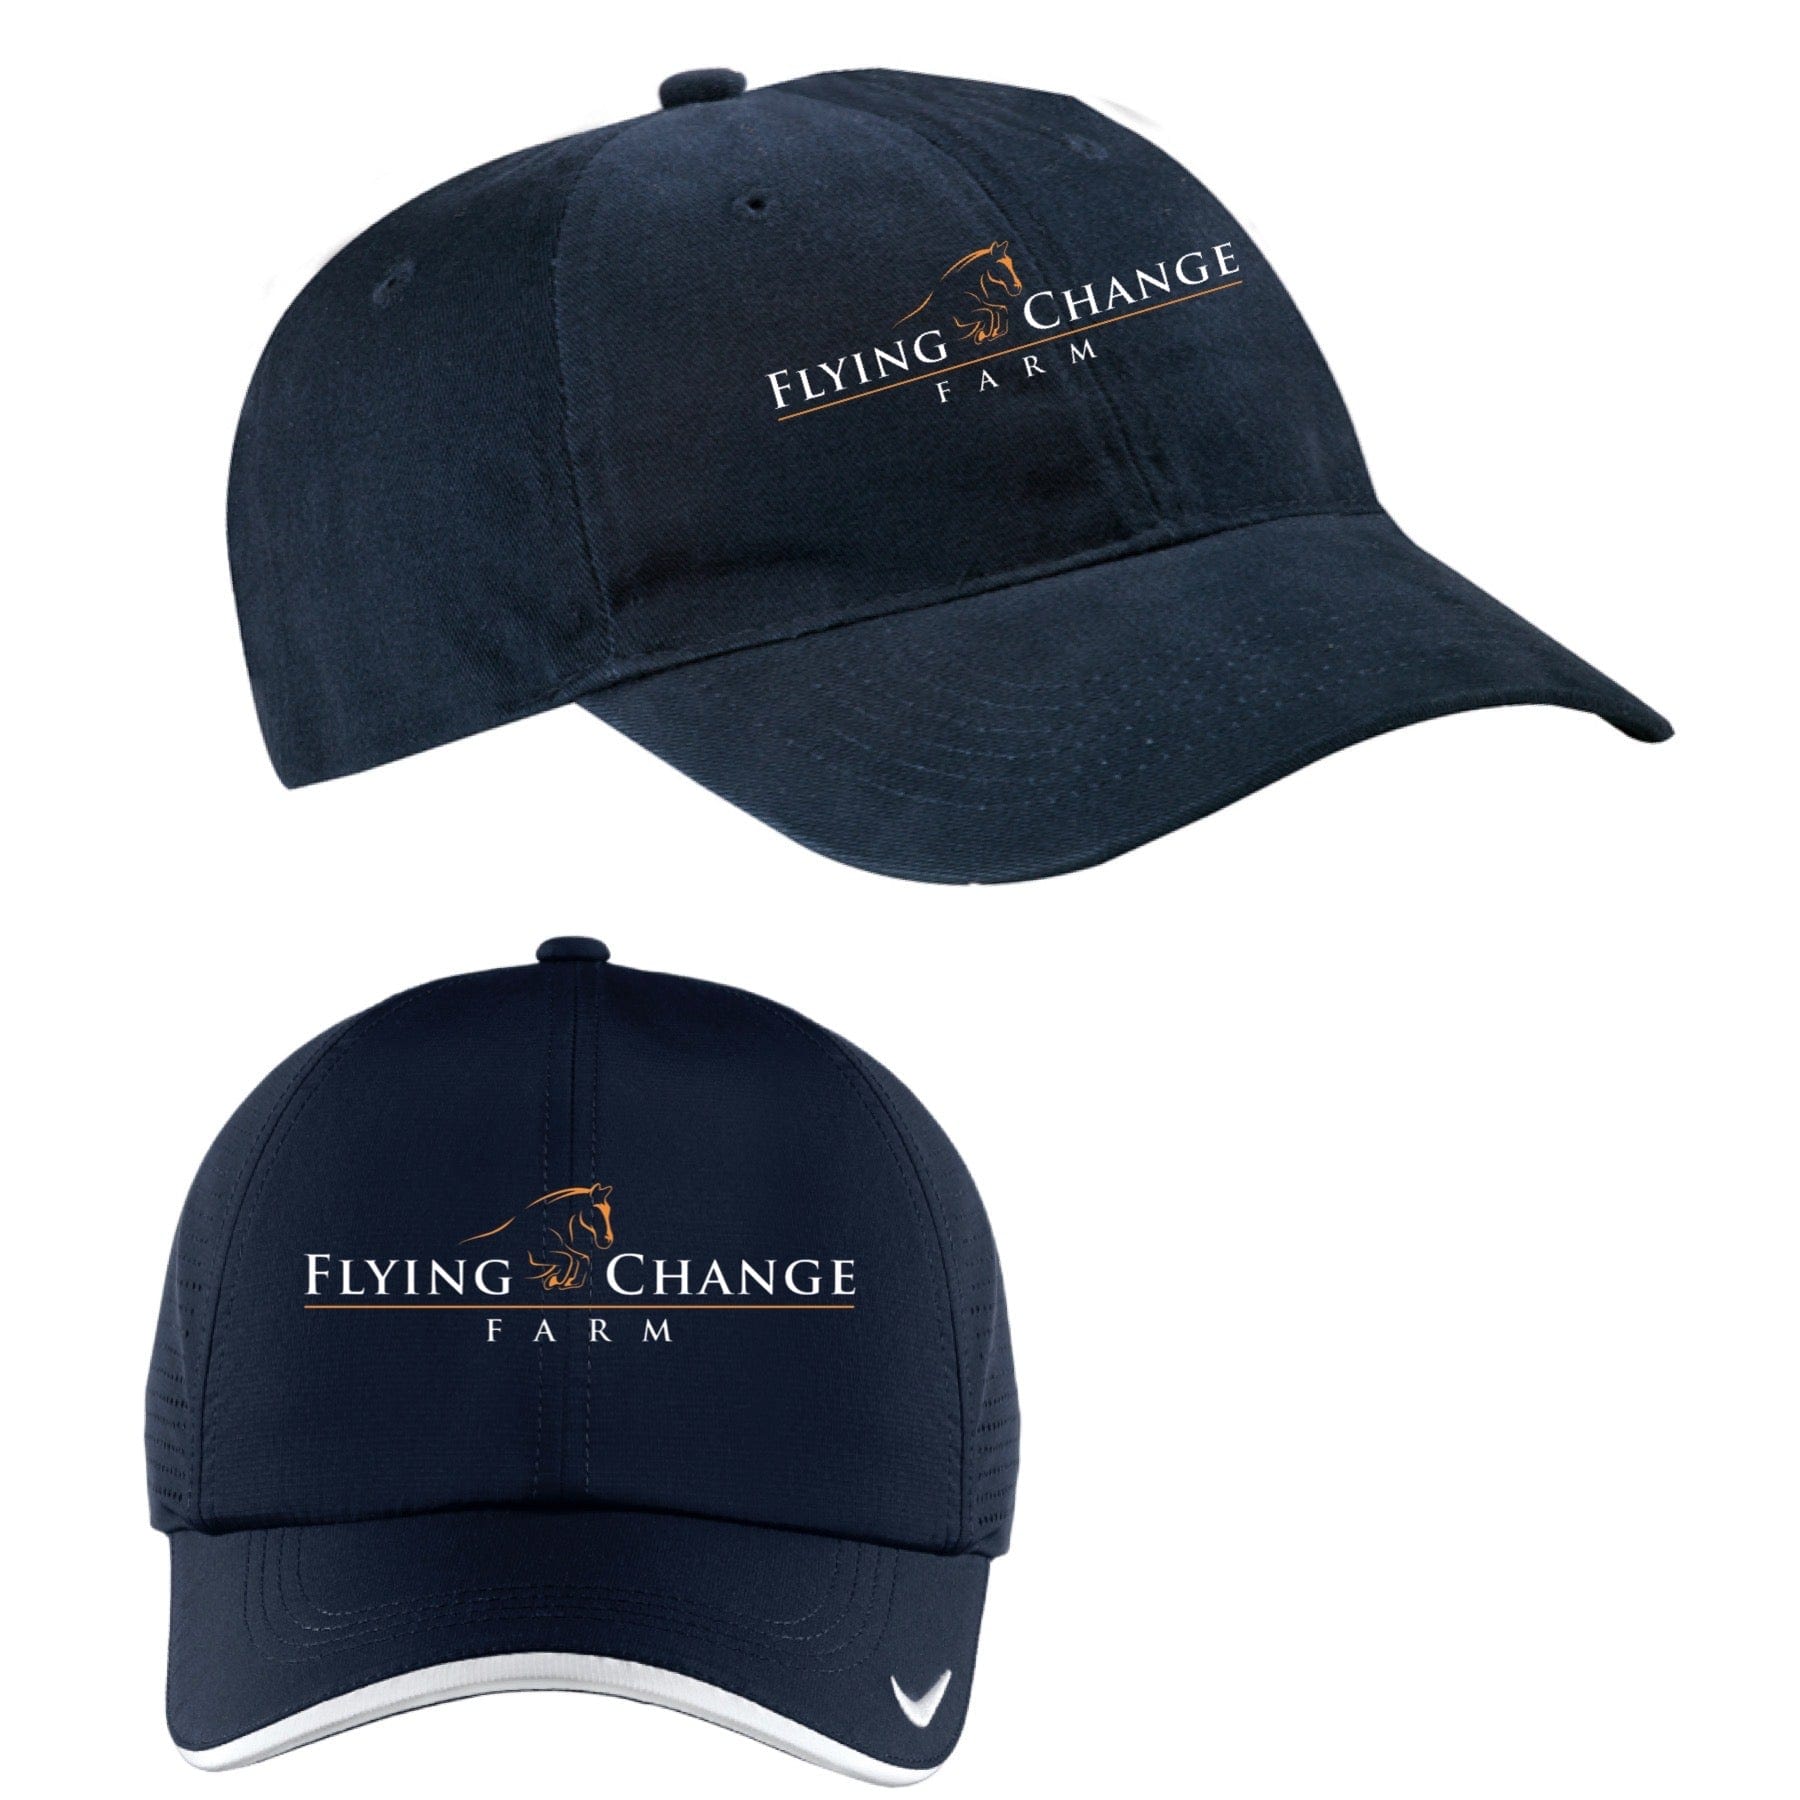 Equestrian Team Apparel Flying Change Farm Baseball Cap equestrian team apparel online tack store mobile tack store custom farm apparel custom show stable clothing equestrian lifestyle horse show clothing riding clothes horses equestrian tack store